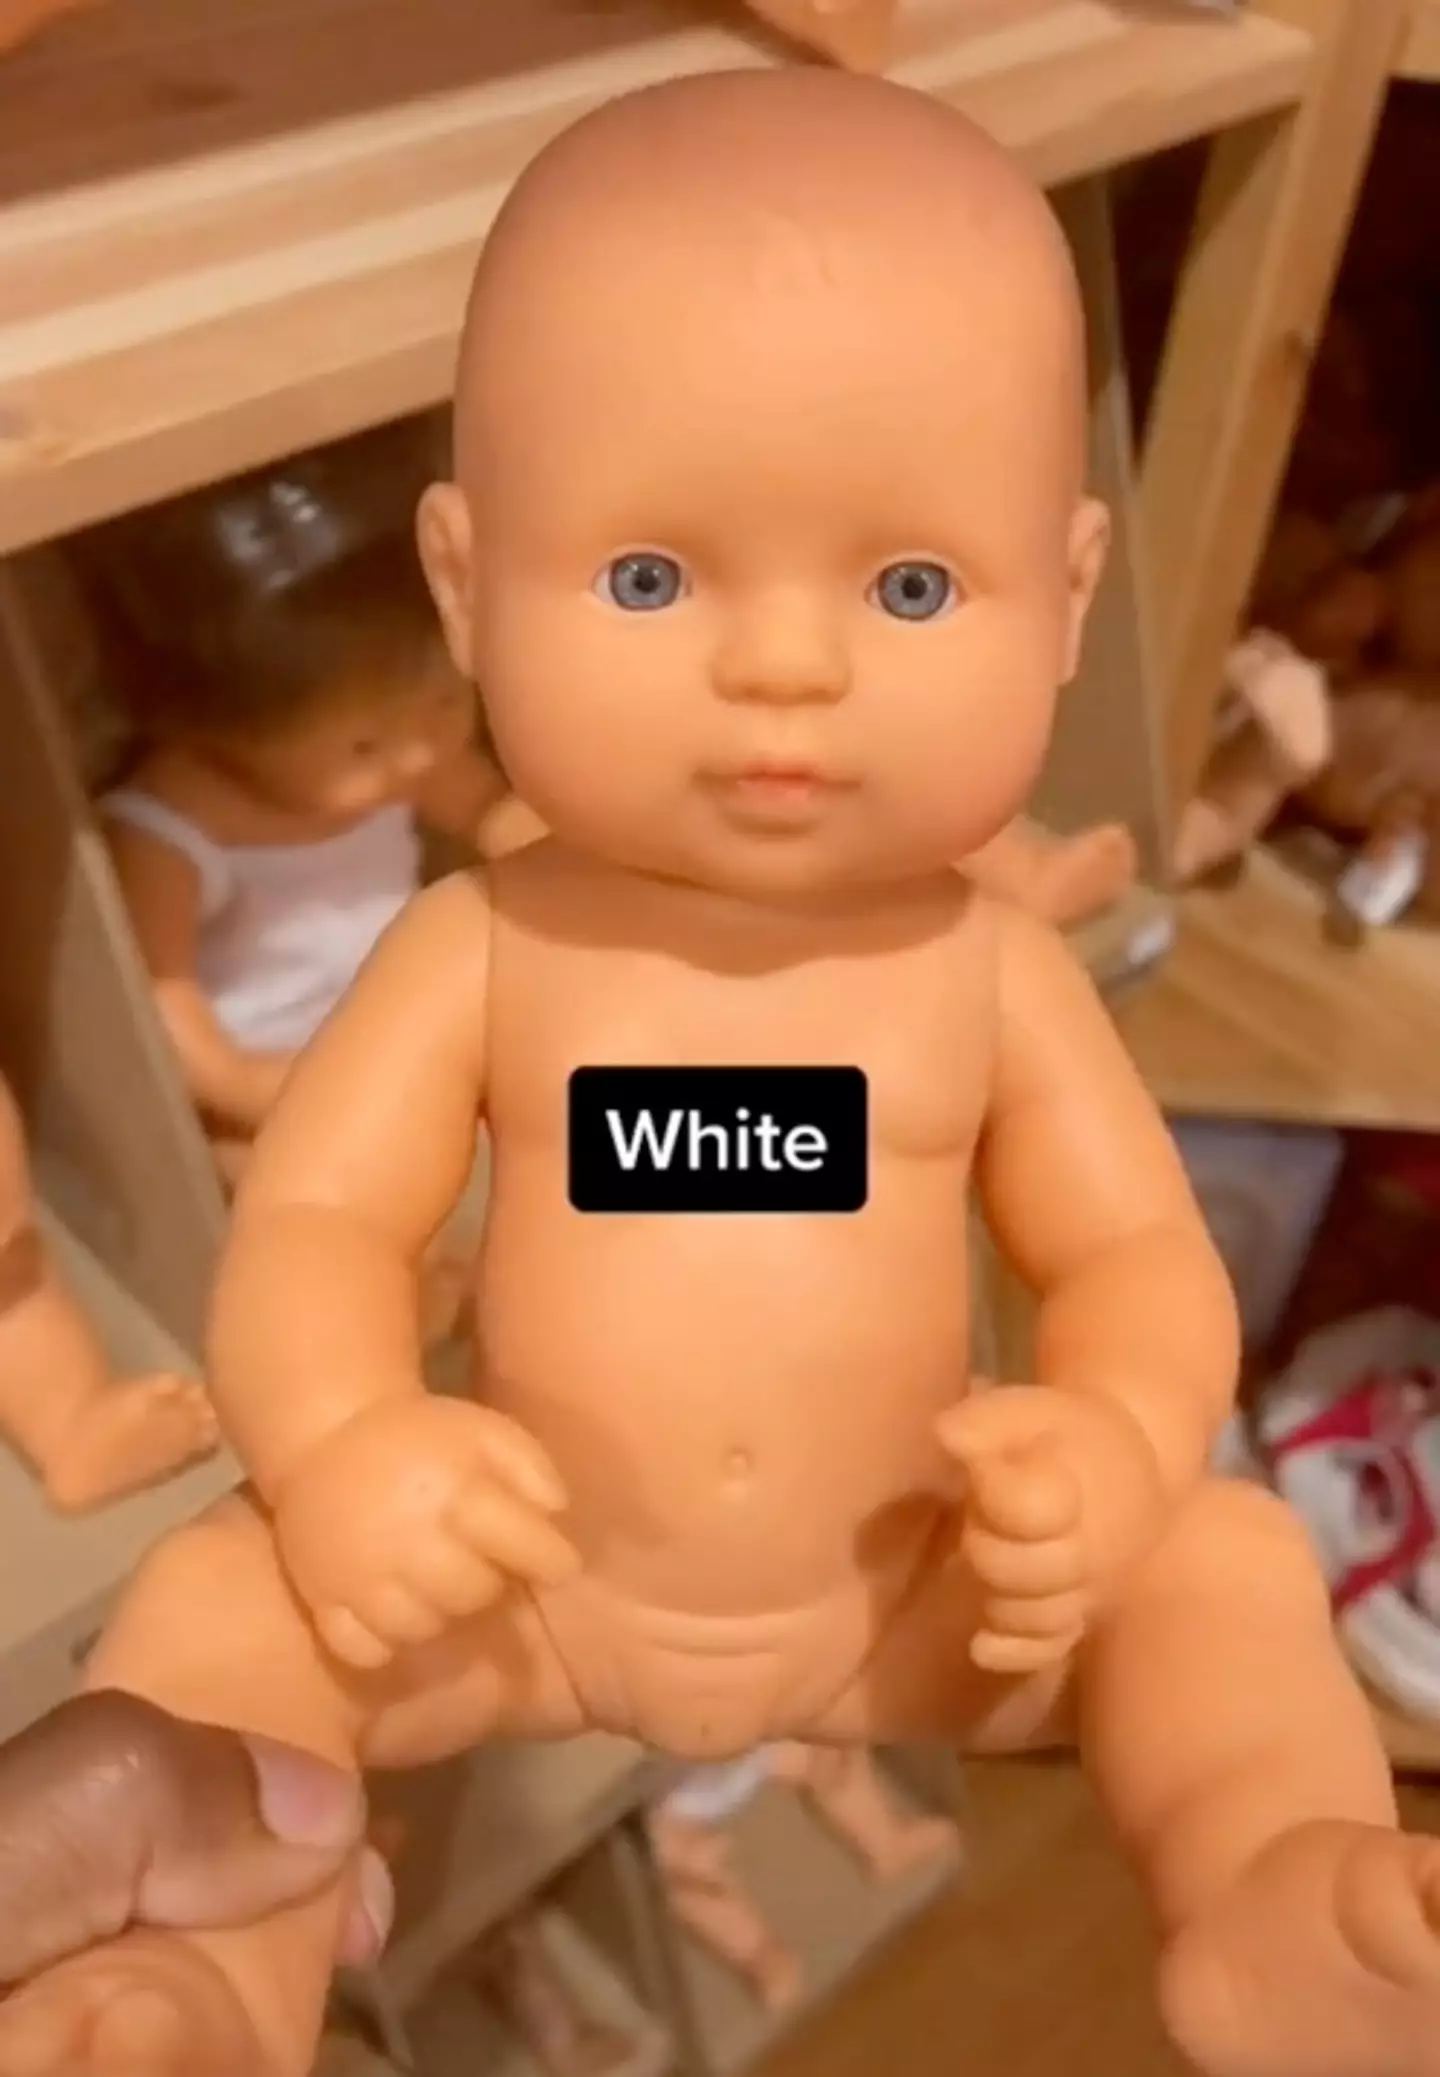 The black doll's features are very different to those of the white doll.